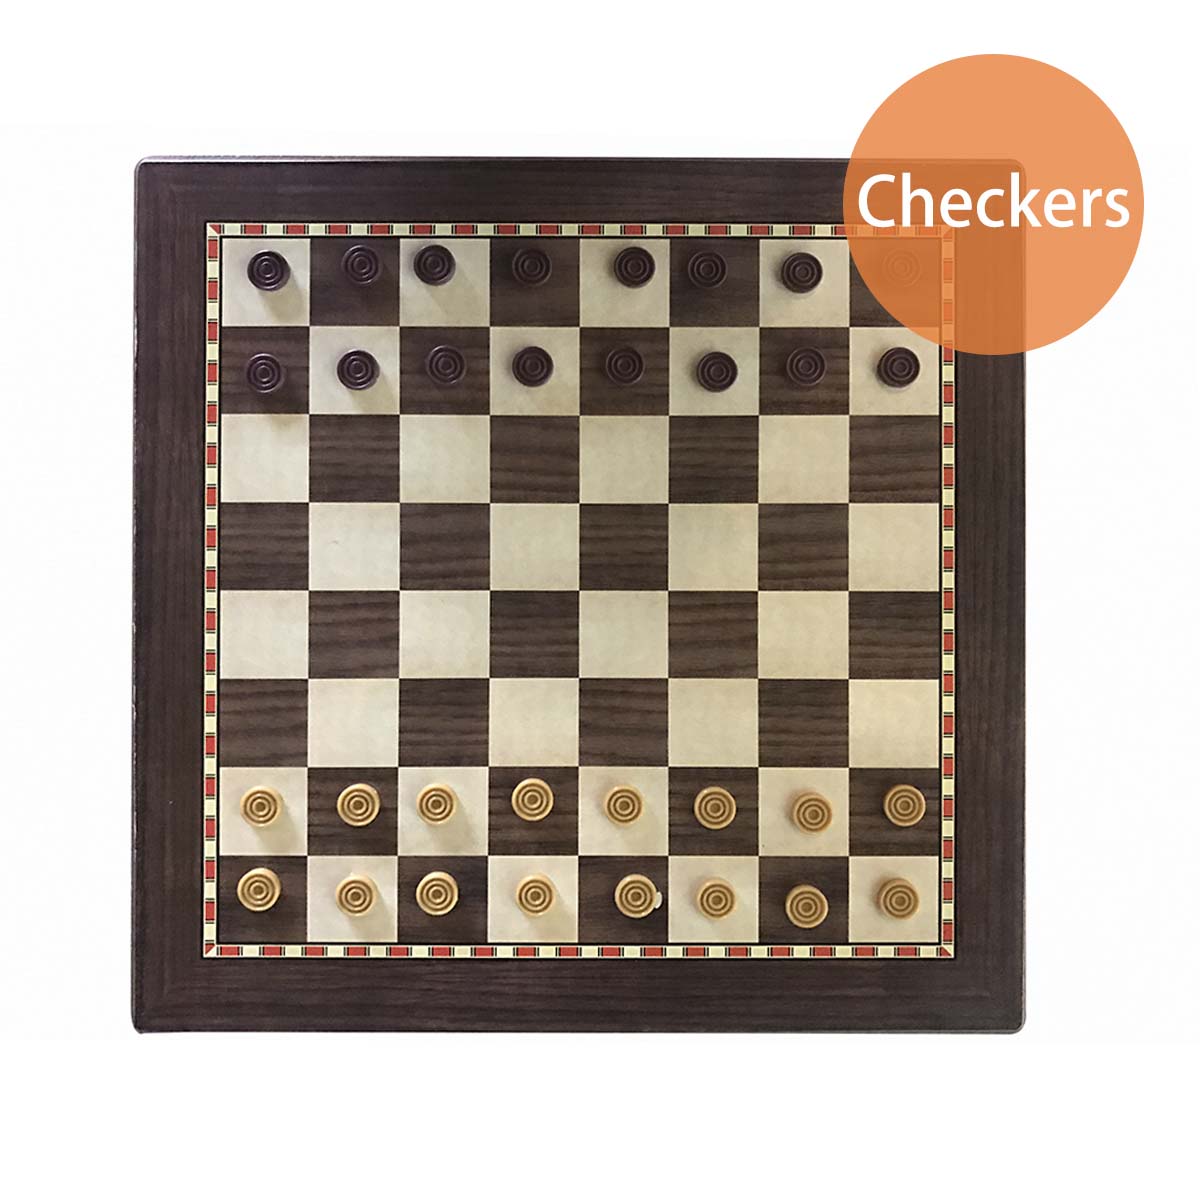 10 in 1 Wooden Board Kids Game Set Chess Backgammon Checkers Snakes ...